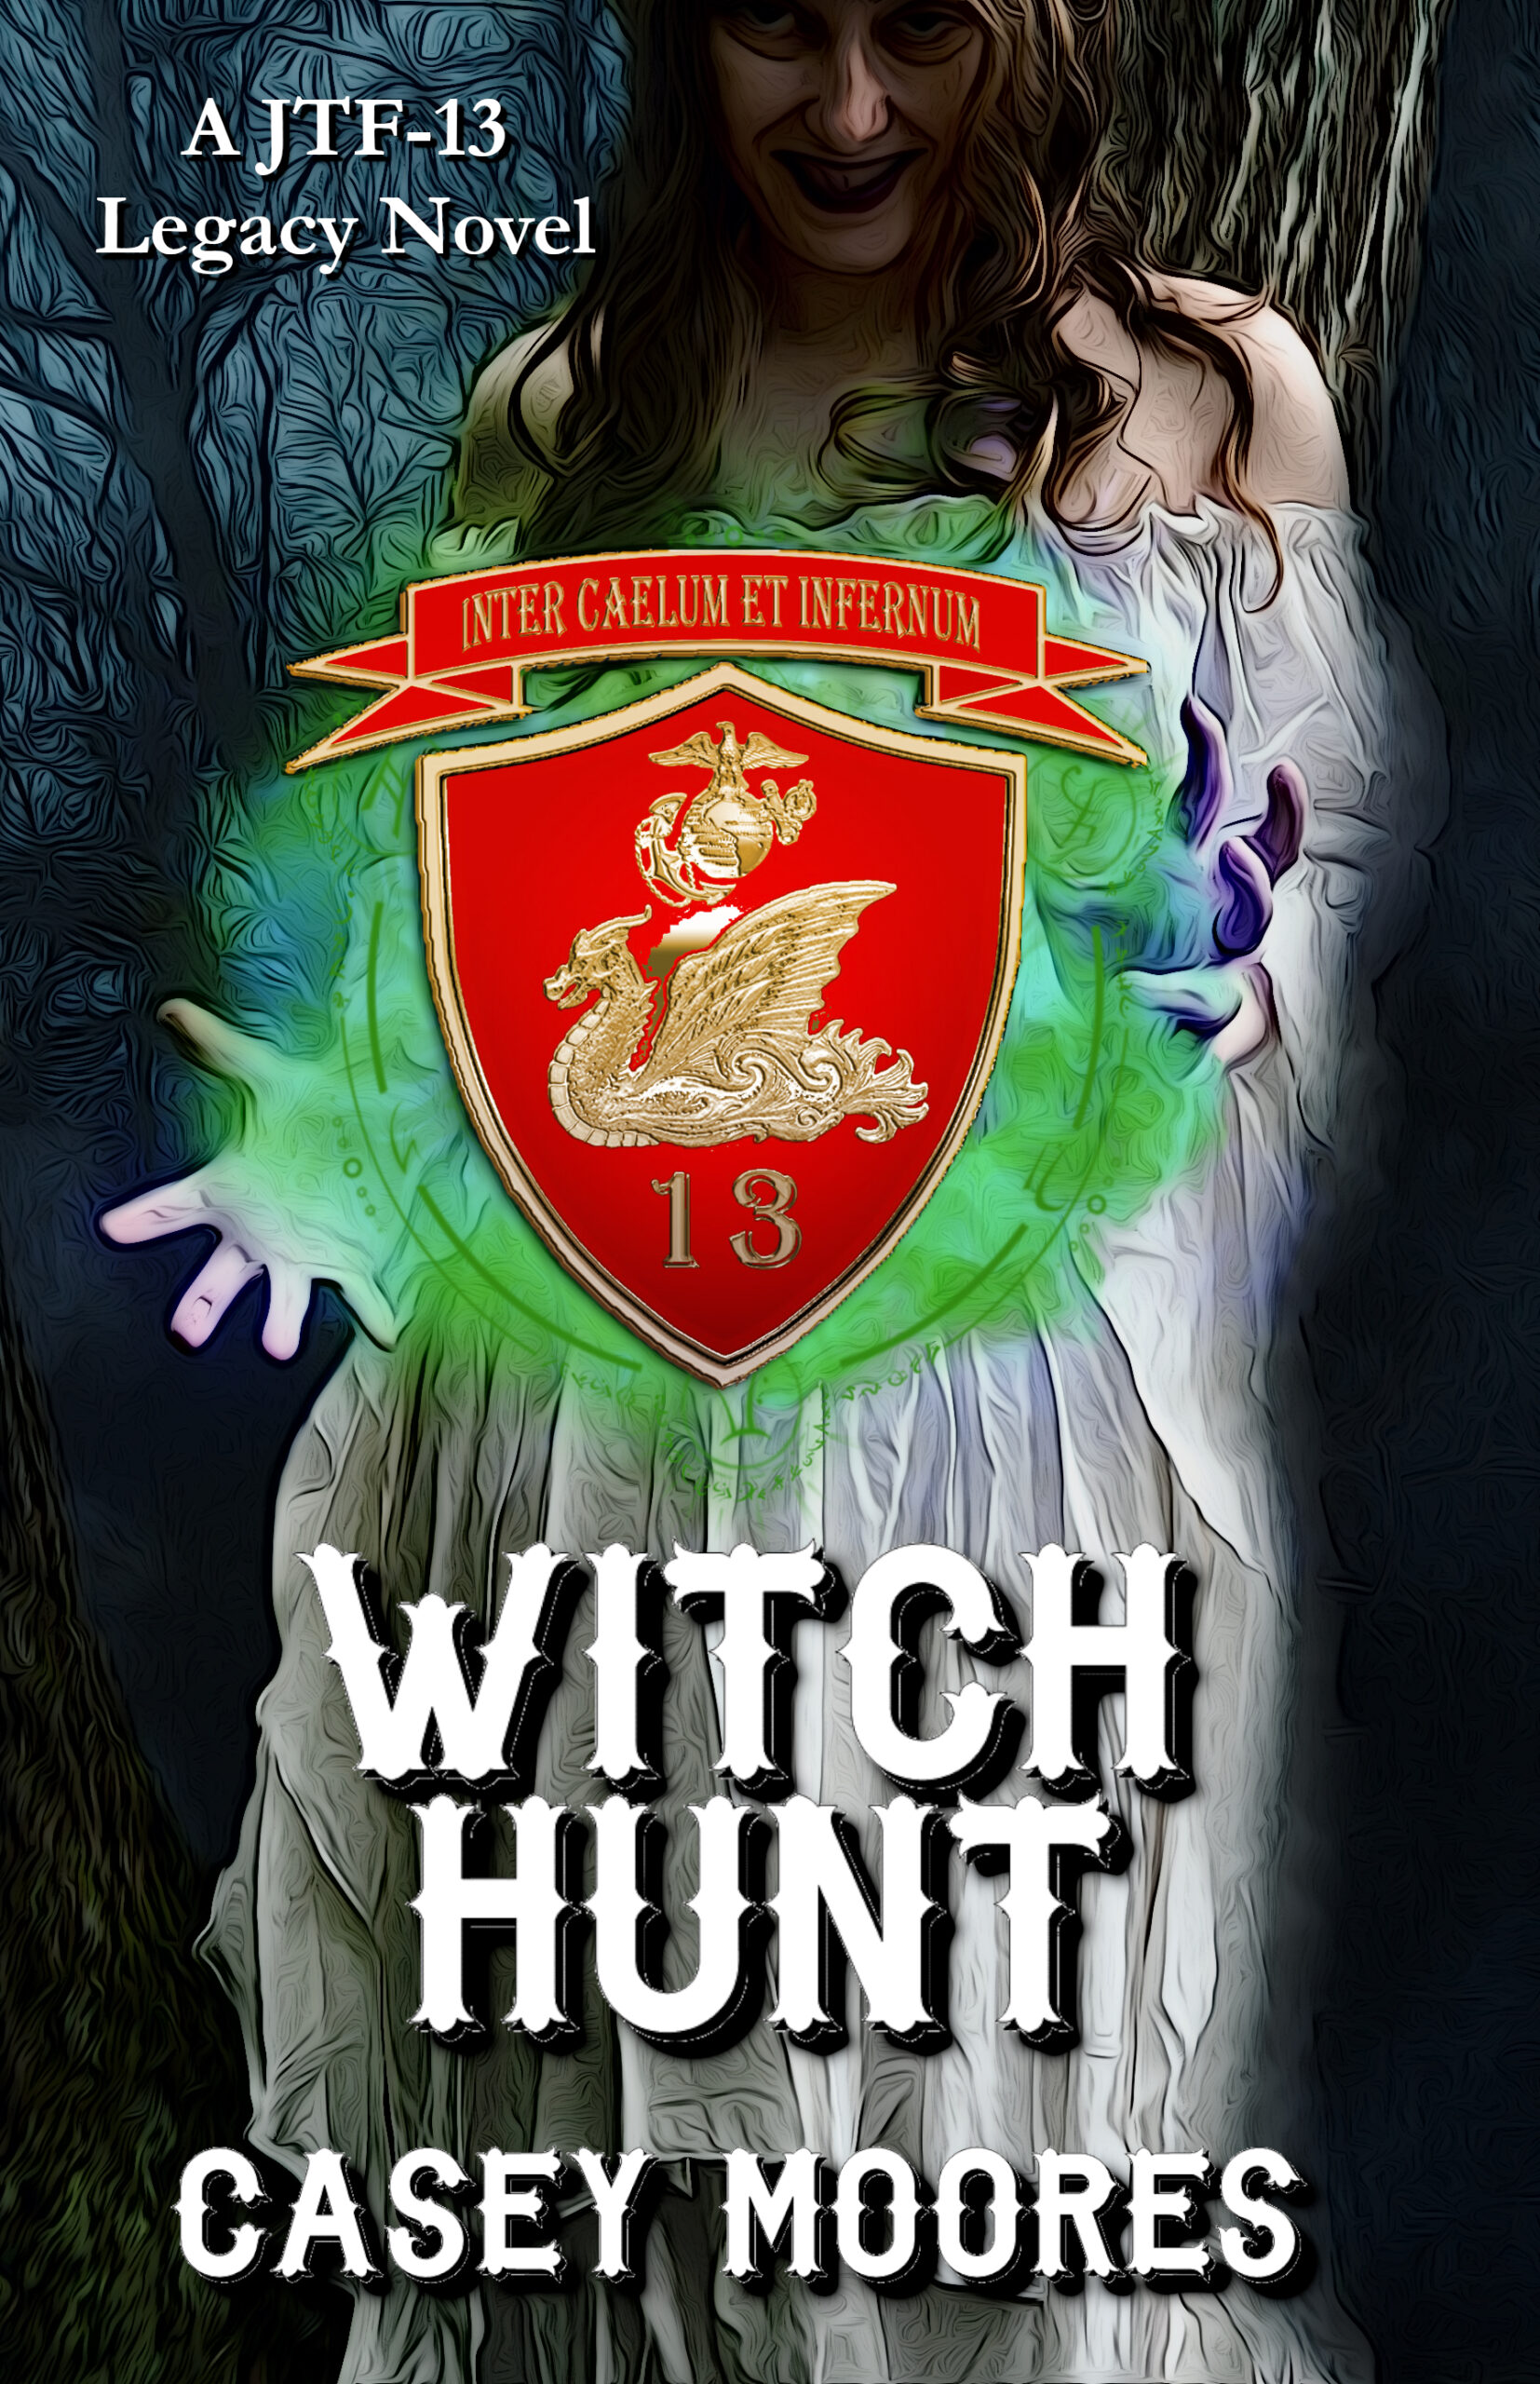 Witch Hunt by Casey Moores now available in Trade Paperback!